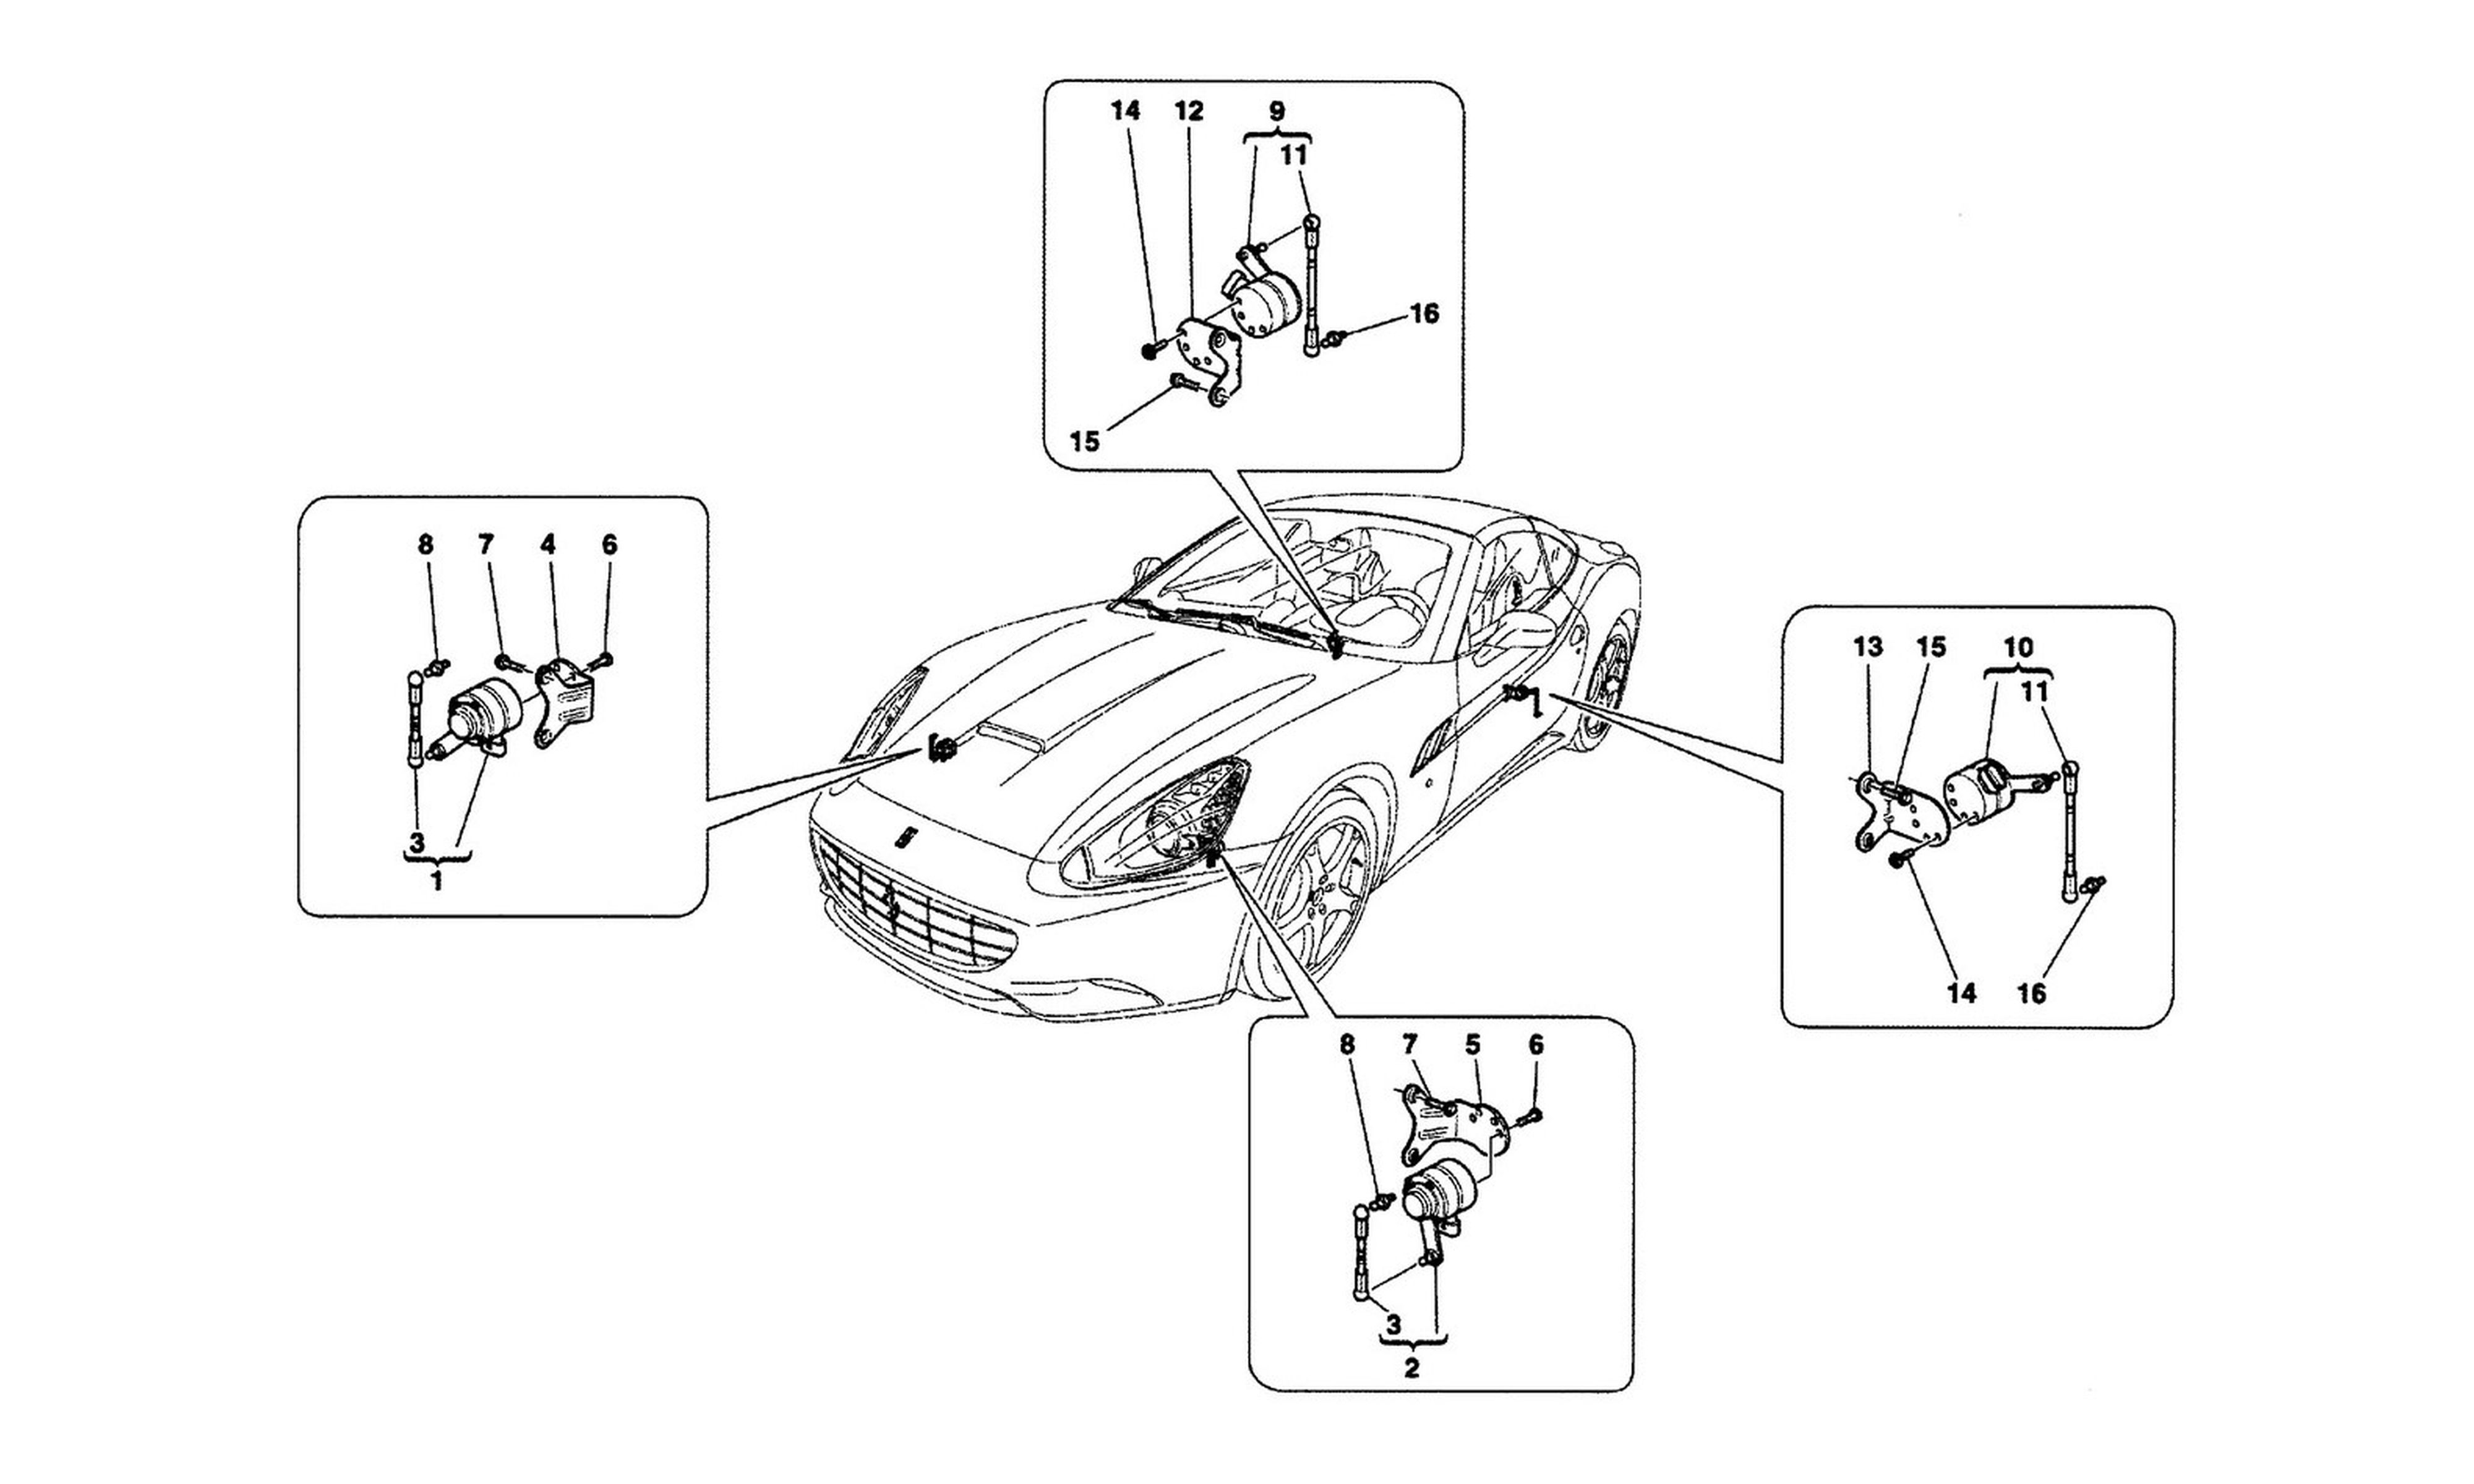 Schematic: Electronic Control (Suspension)